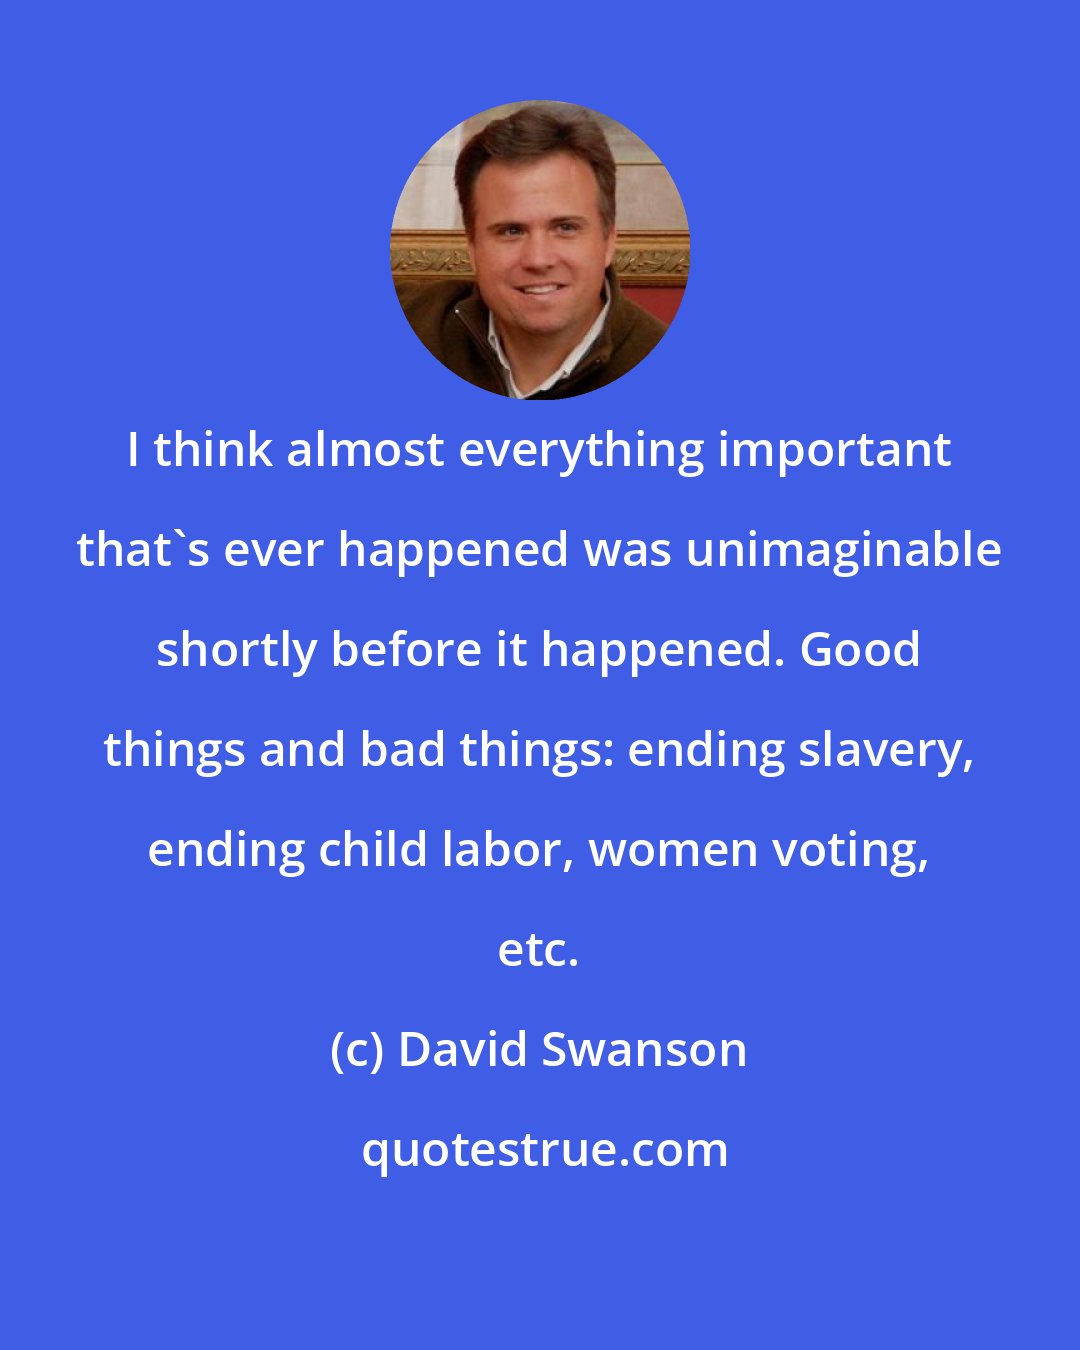 David Swanson: I think almost everything important that's ever happened was unimaginable shortly before it happened. Good things and bad things: ending slavery, ending child labor, women voting, etc.